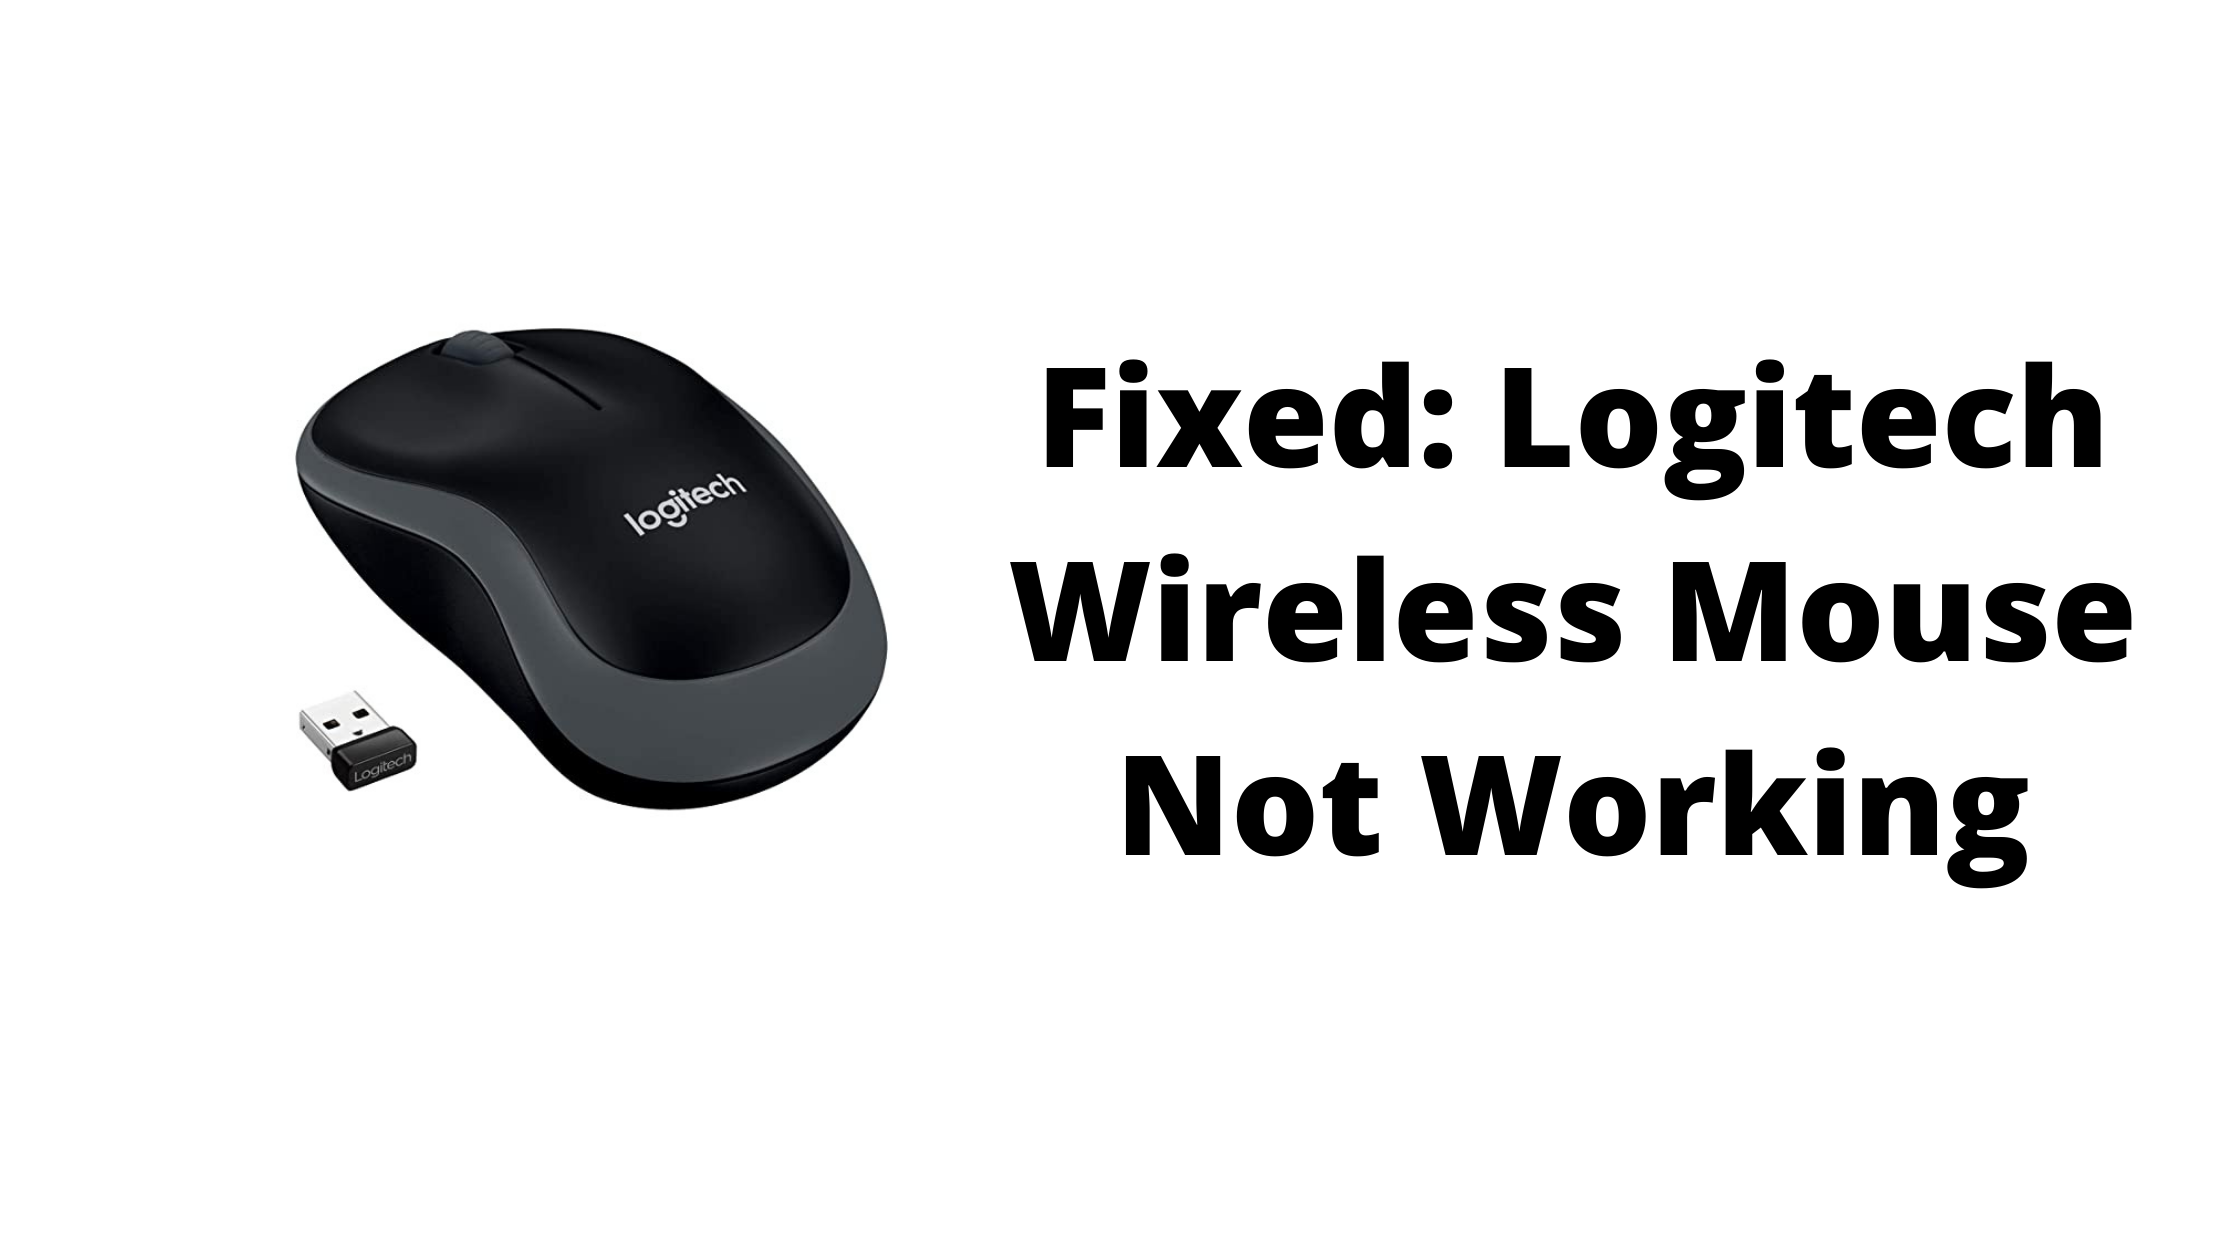 sværge fredelig klog Logitech Wireless Mouse Not working? Here's how to reset it - Fixable stuff